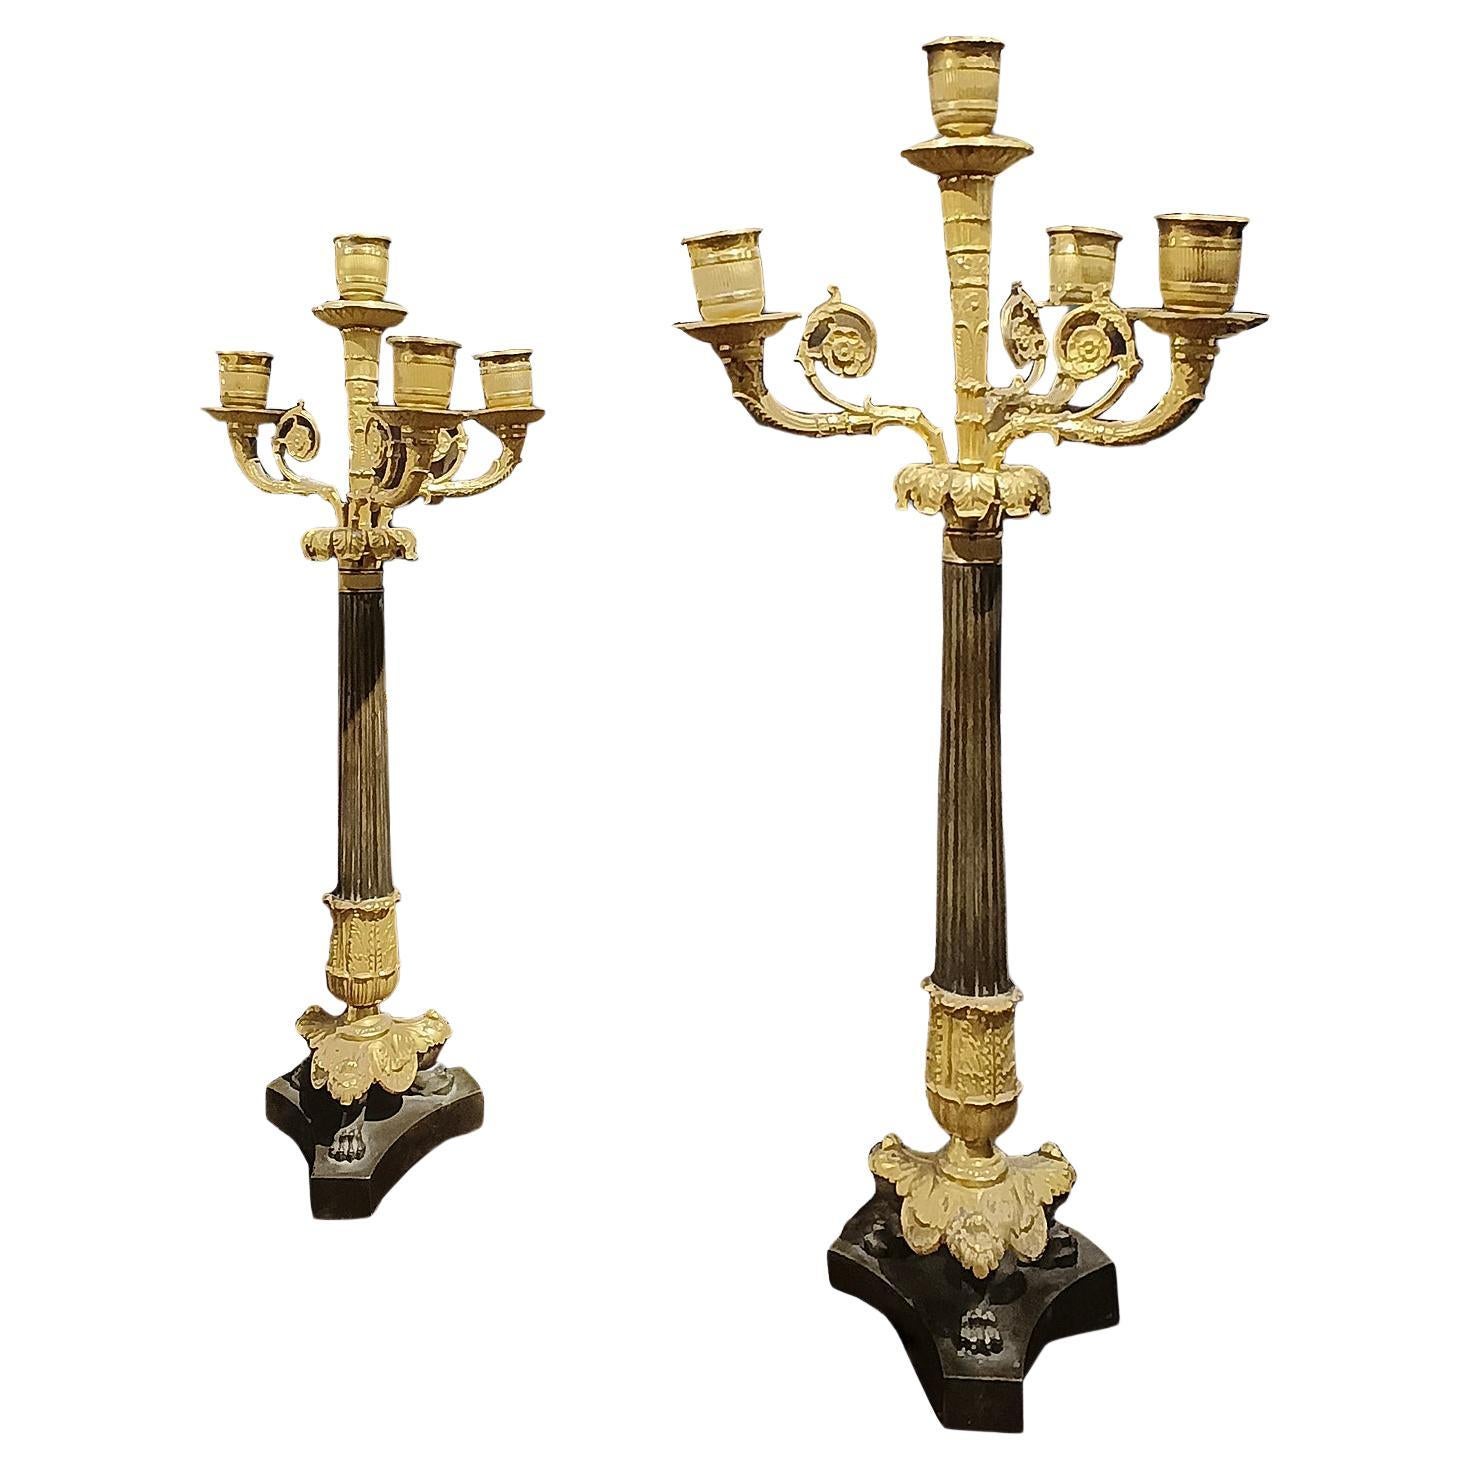 EARLY 19th CENTURY PAIR OF CARLO X BRONZE CANDLESTICKS For Sale